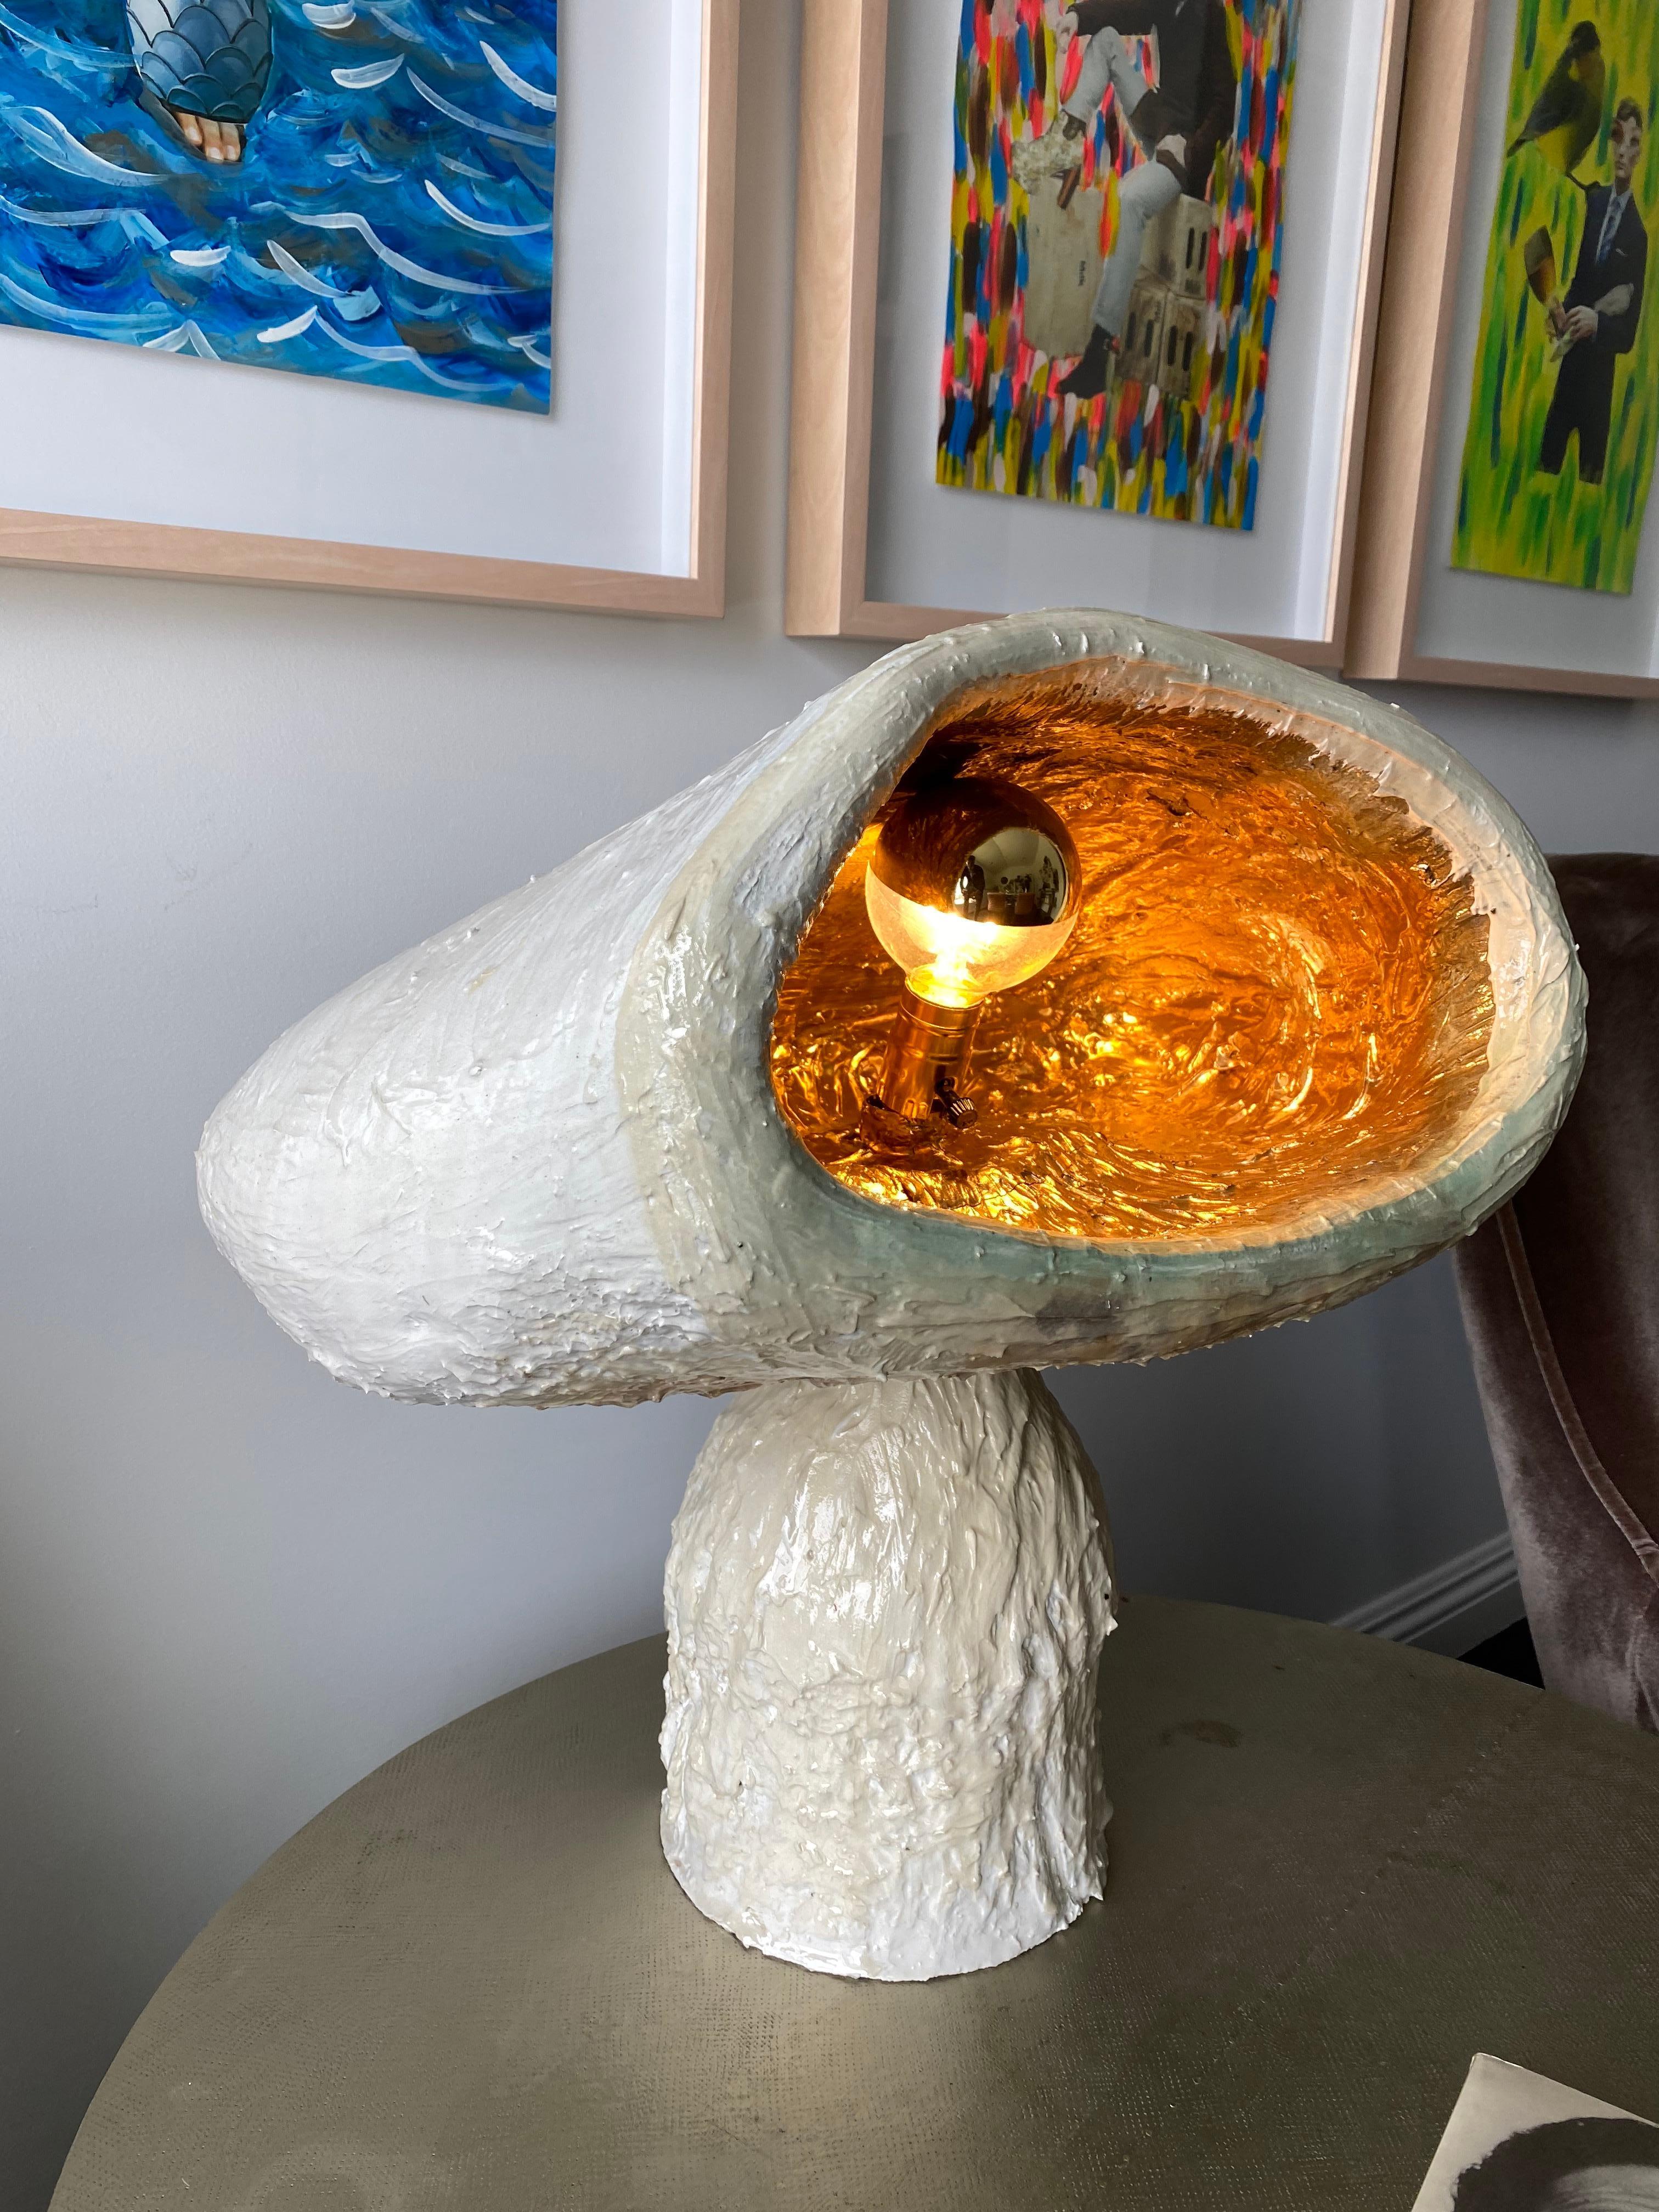 White Gold Sculptural Plaster Table Lamp, 21st Century by Mattia Biagi In New Condition For Sale In Culver City, CA